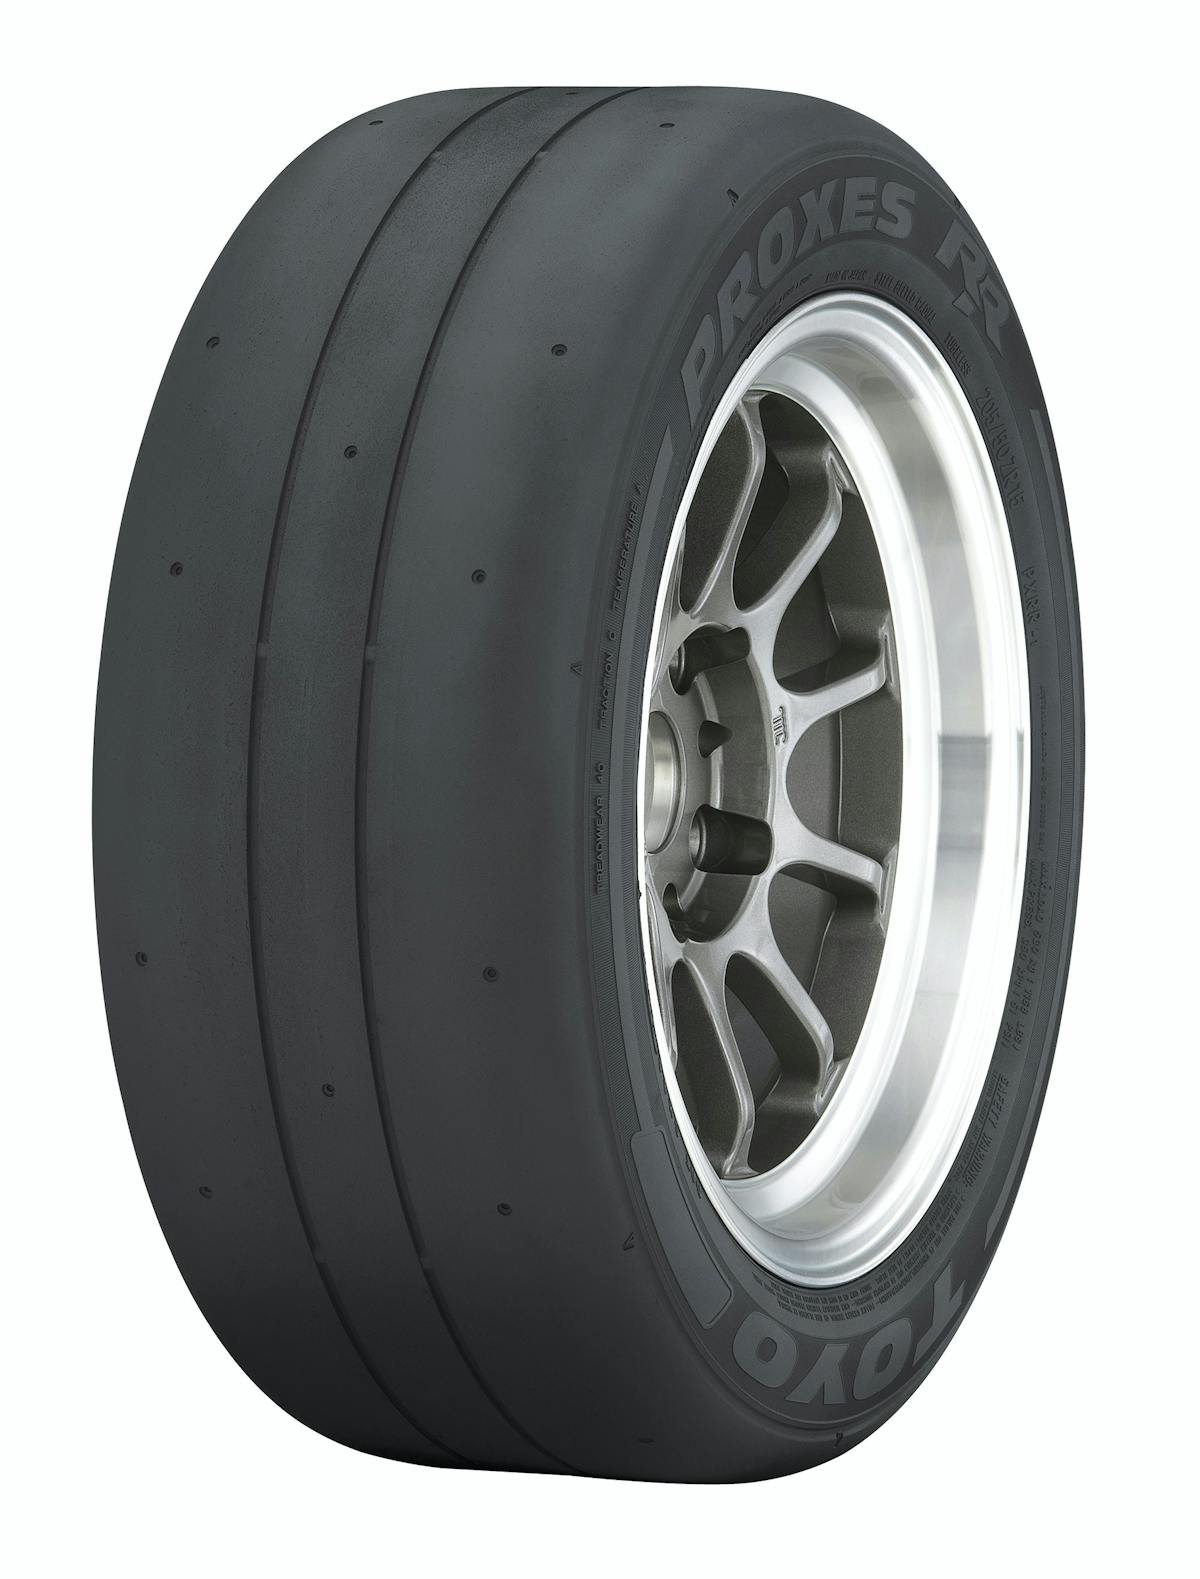 toyo-has-a-new-road-race-tire